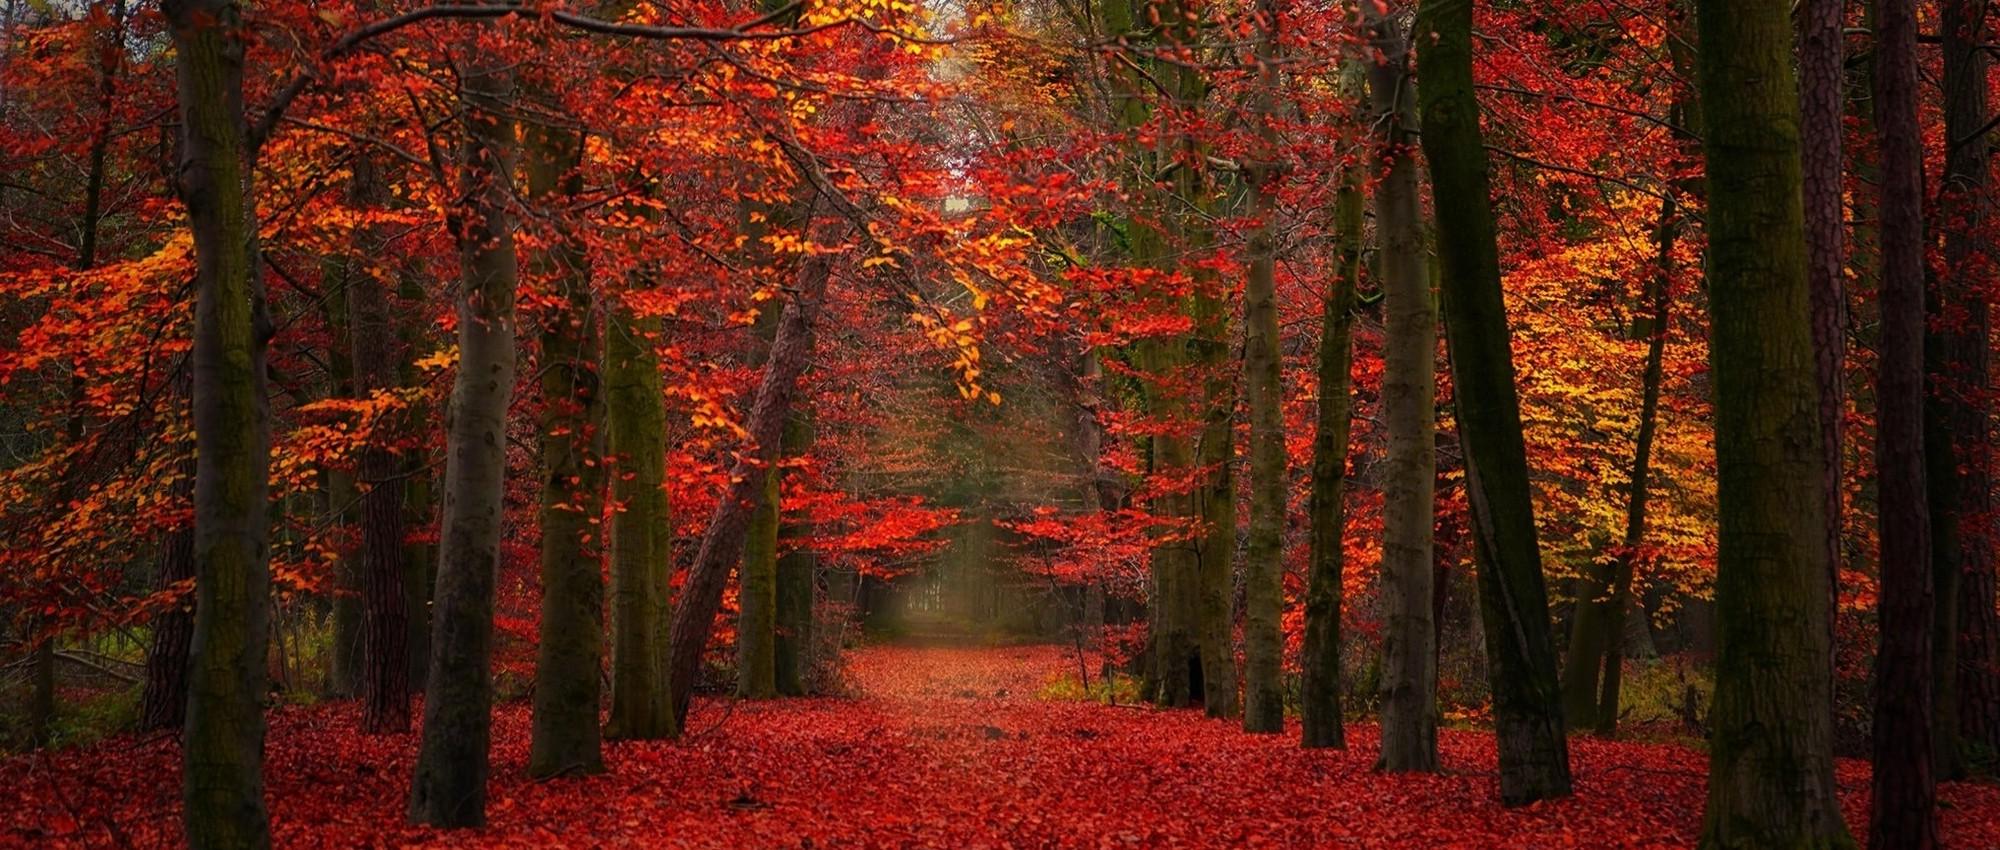 nature, Landscape, Fall, Red, Yellow, Leaves, Path, Trees